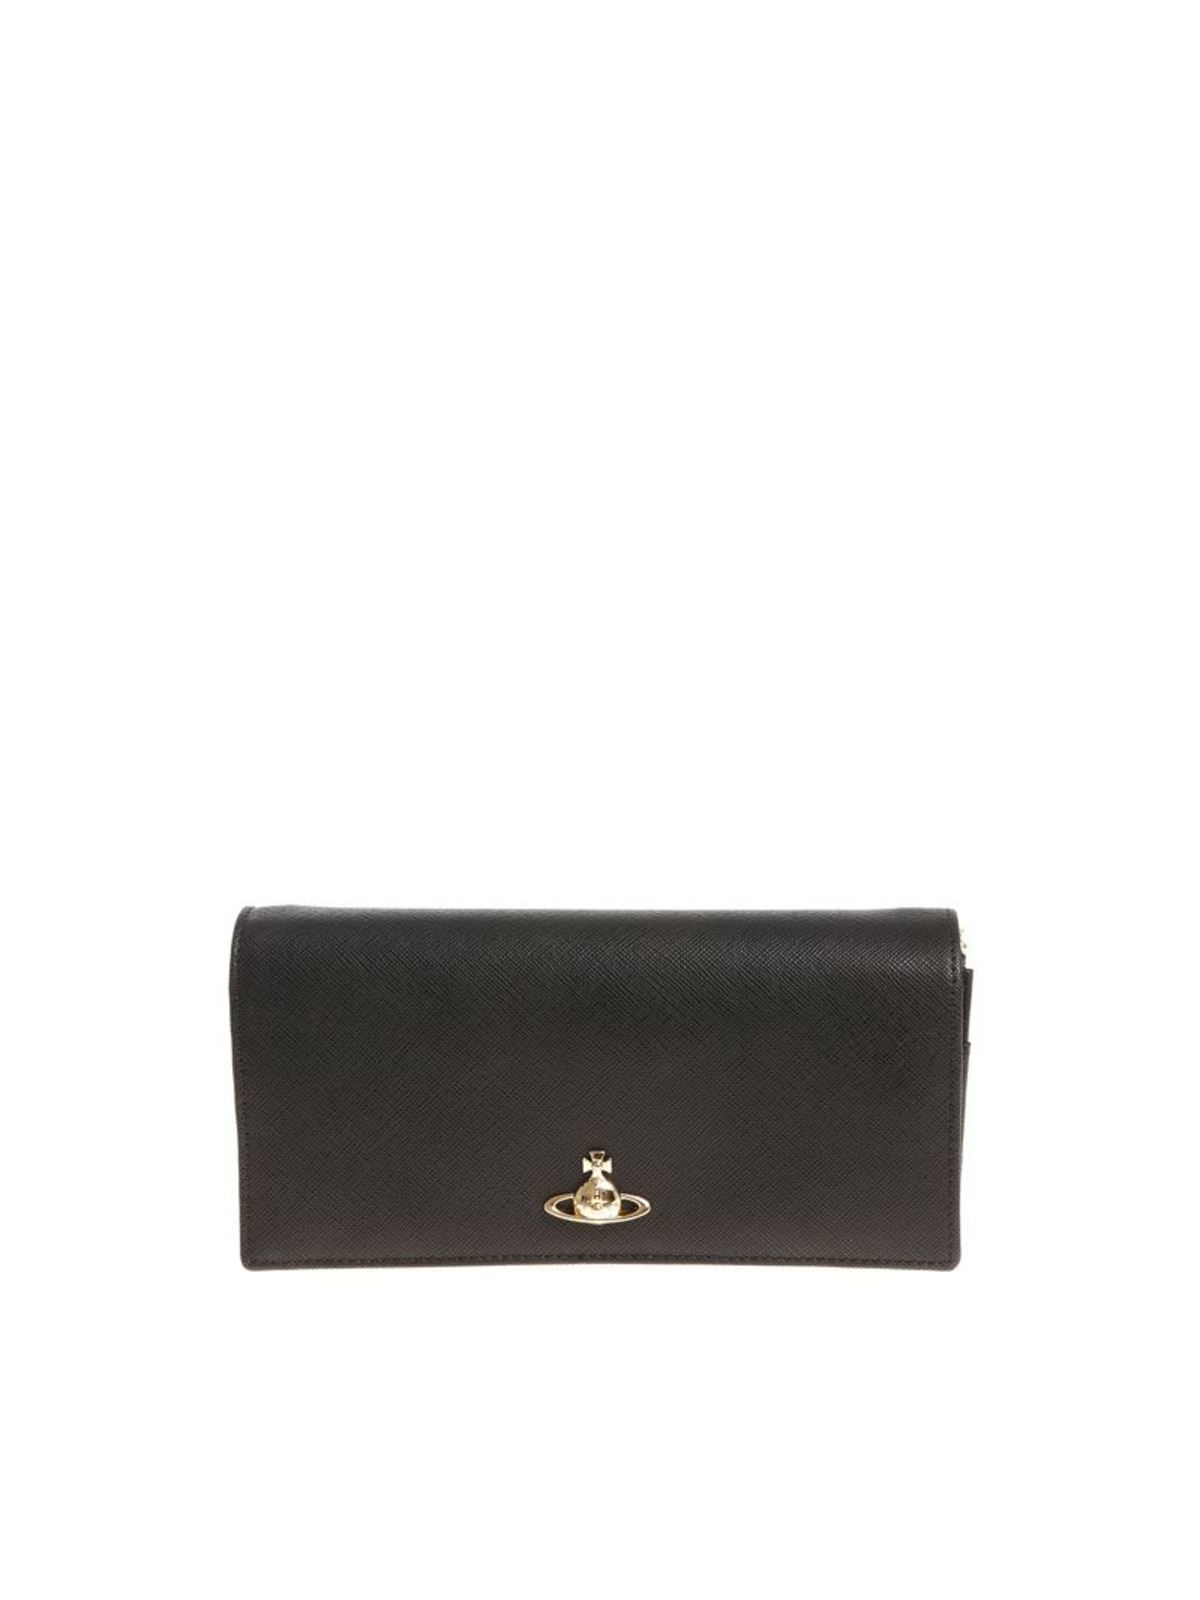 Vivienne Westwood Pimlico Leather Wallet With Chain In Negro | ModeSens